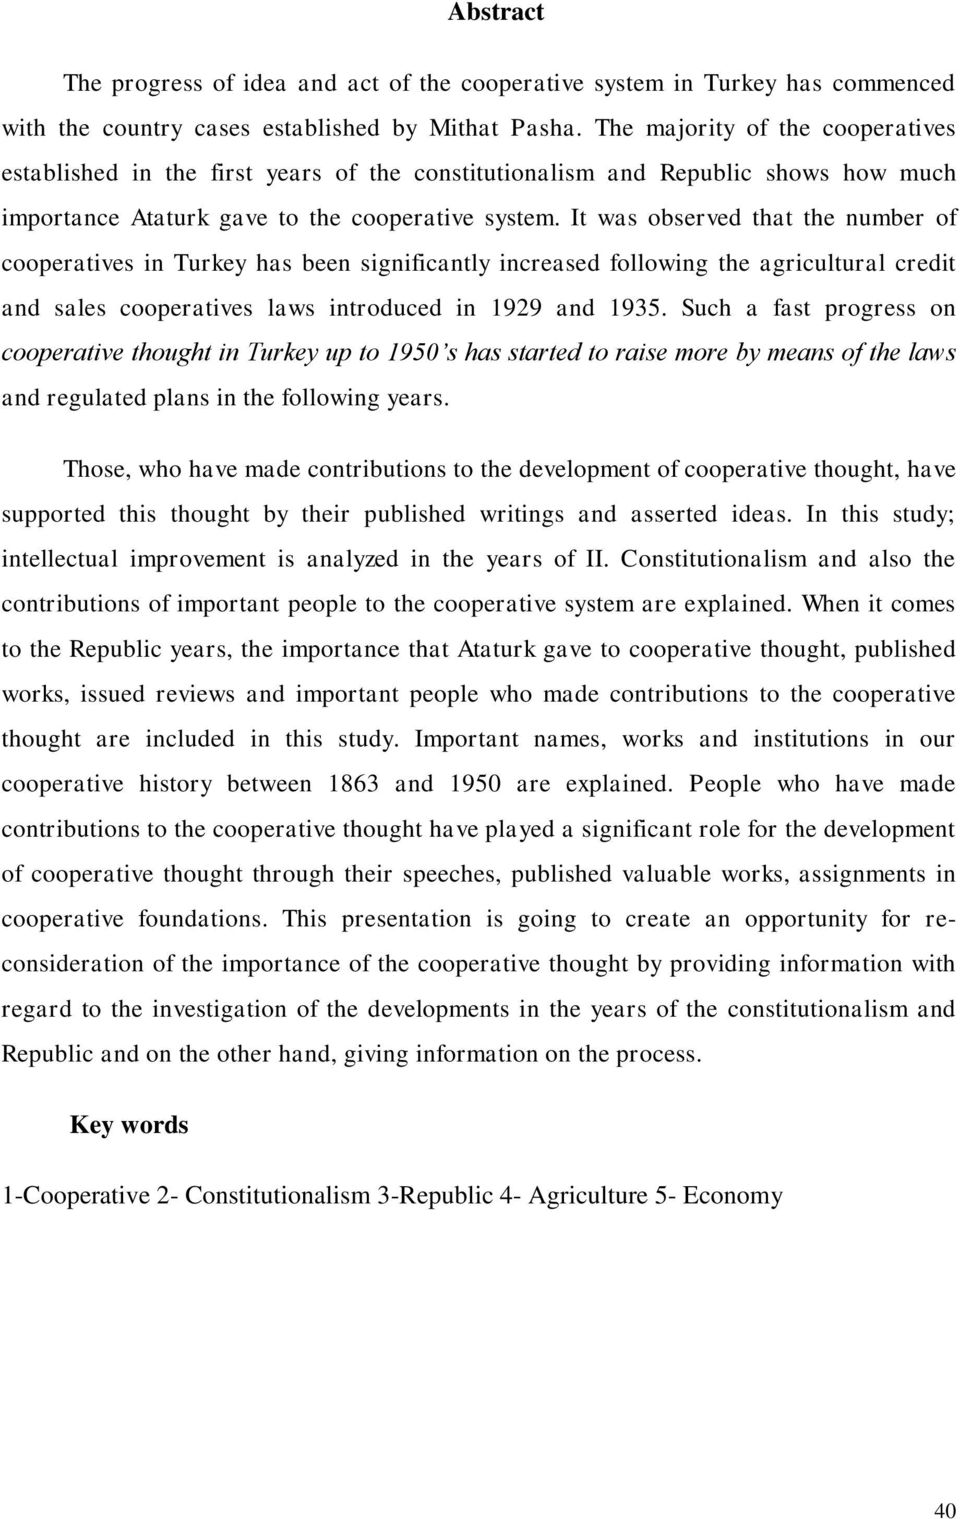 It was observed that the number of cooperatives in Turkey has been significantly increased following the agricultural credit and sales cooperatives laws introduced in 1929 and 1935.